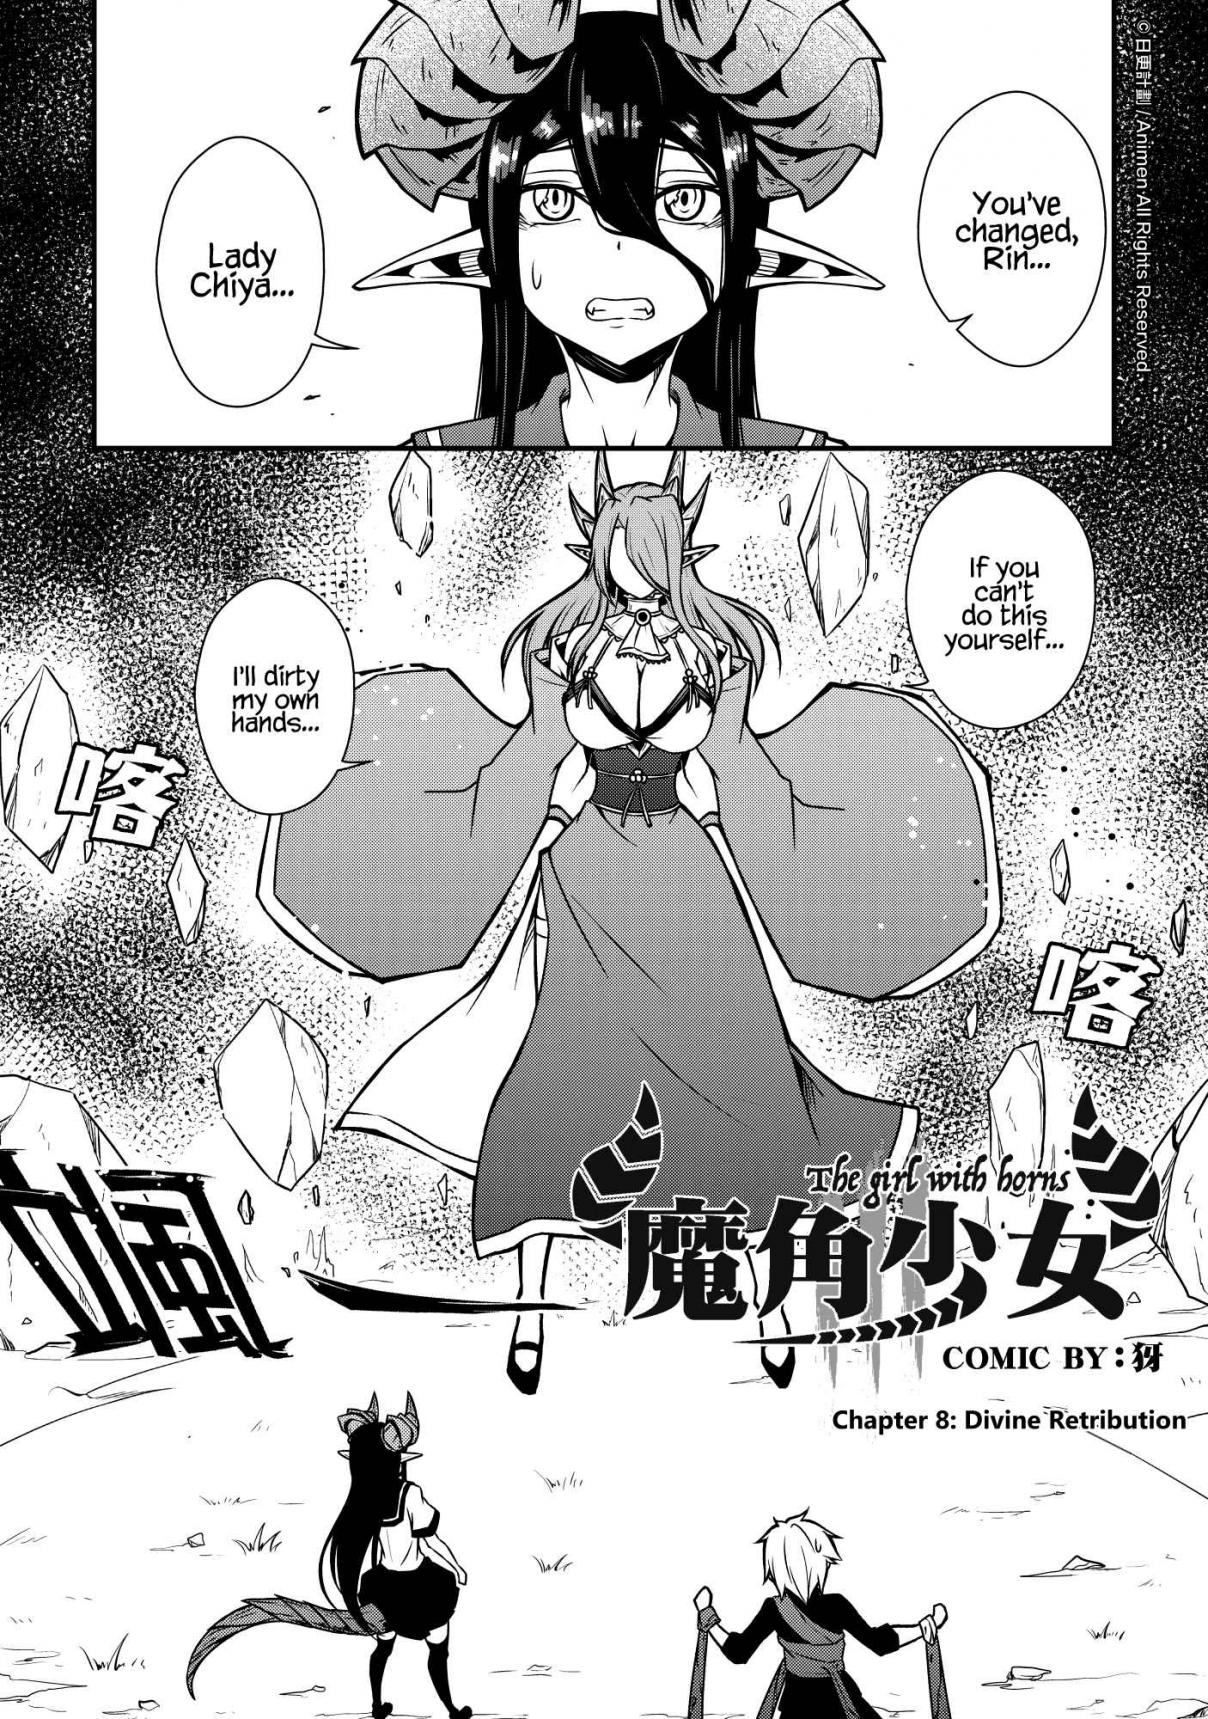 The Girl With Horns Vol. 1 Ch. 8 Divine Retribution